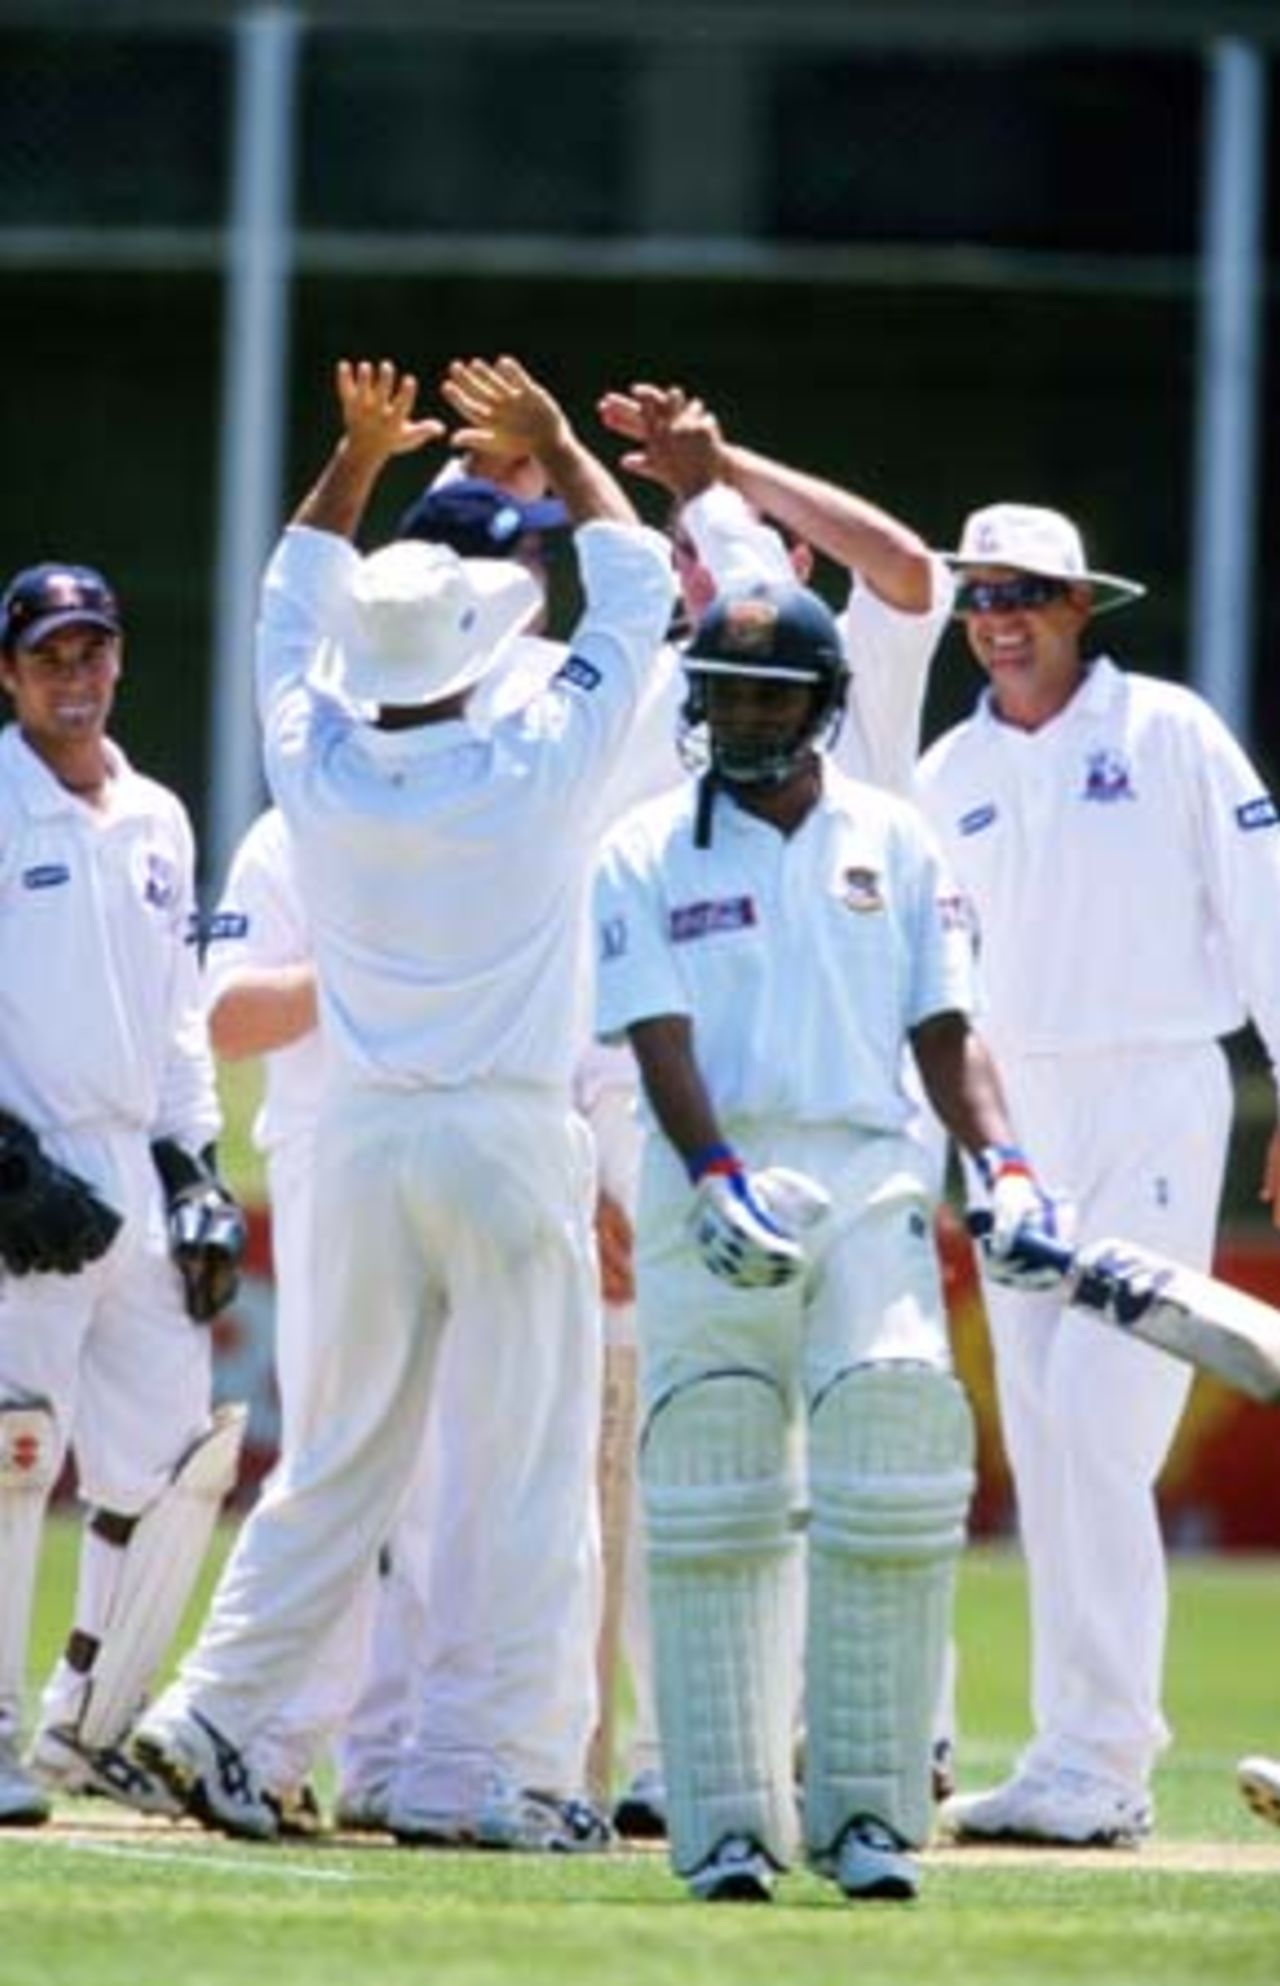 Bangladeshi batsman Habibul Bashar walks off the field after being dismissed bowled by Auckland bowler Kyle Mills for 0. Auckland players celebrate in the background. Tour match: Auckland v Bangladeshis at Eden Park Outer Oval, Auckland, 12-15 Dec 2001 (14 December 2001).